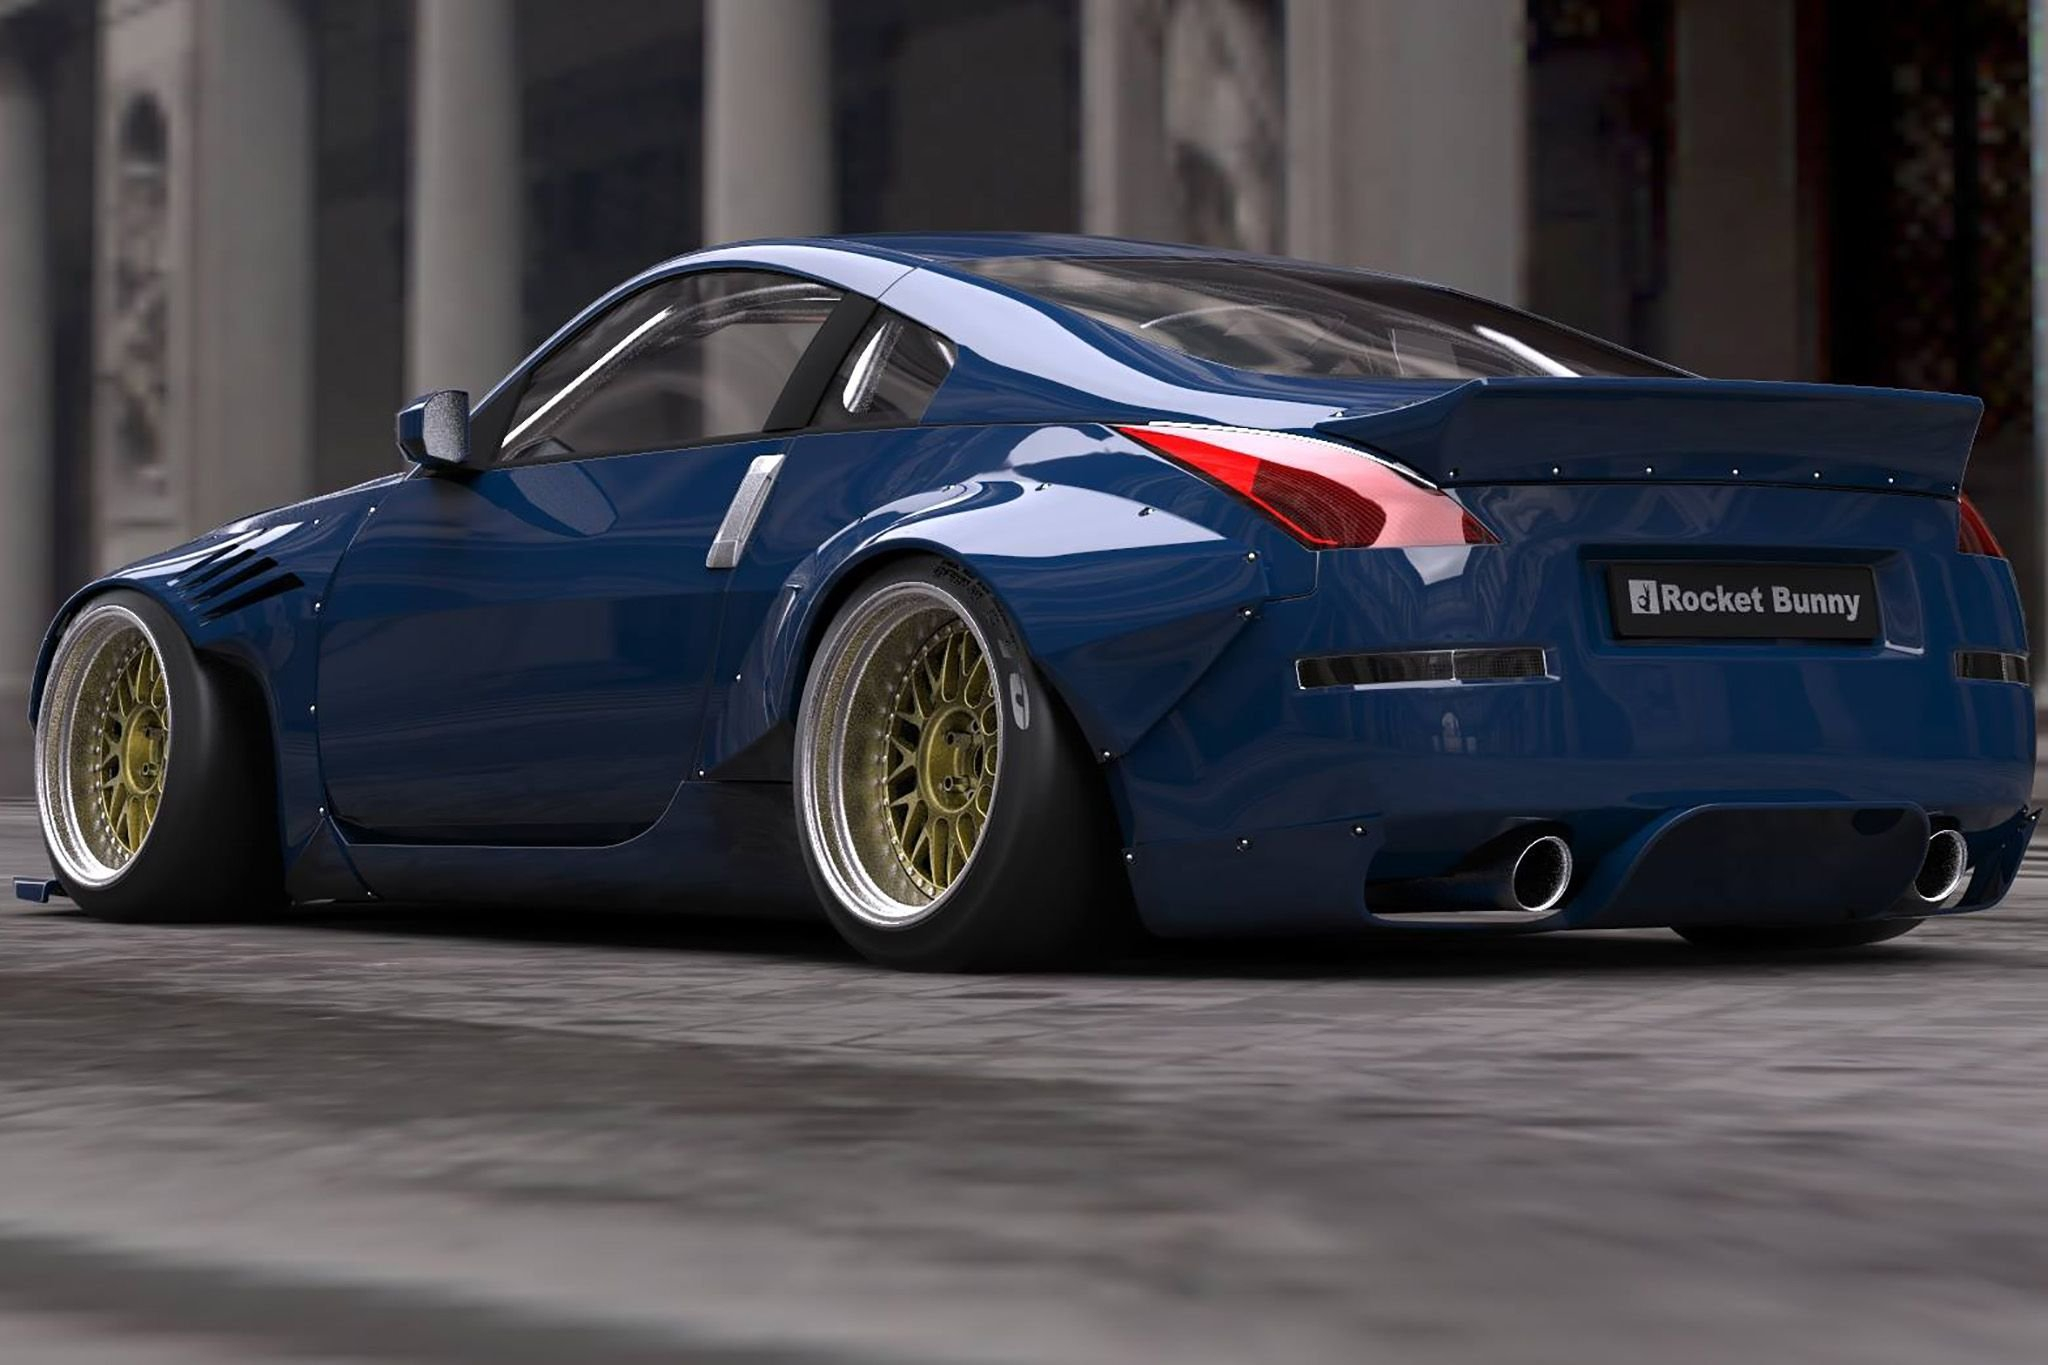 2048x1365 rocket, Bunny, 350z, Nissan, Modified, Bodykit, Cars Wallpapers HD / Desktop and Mobile Backgrounds